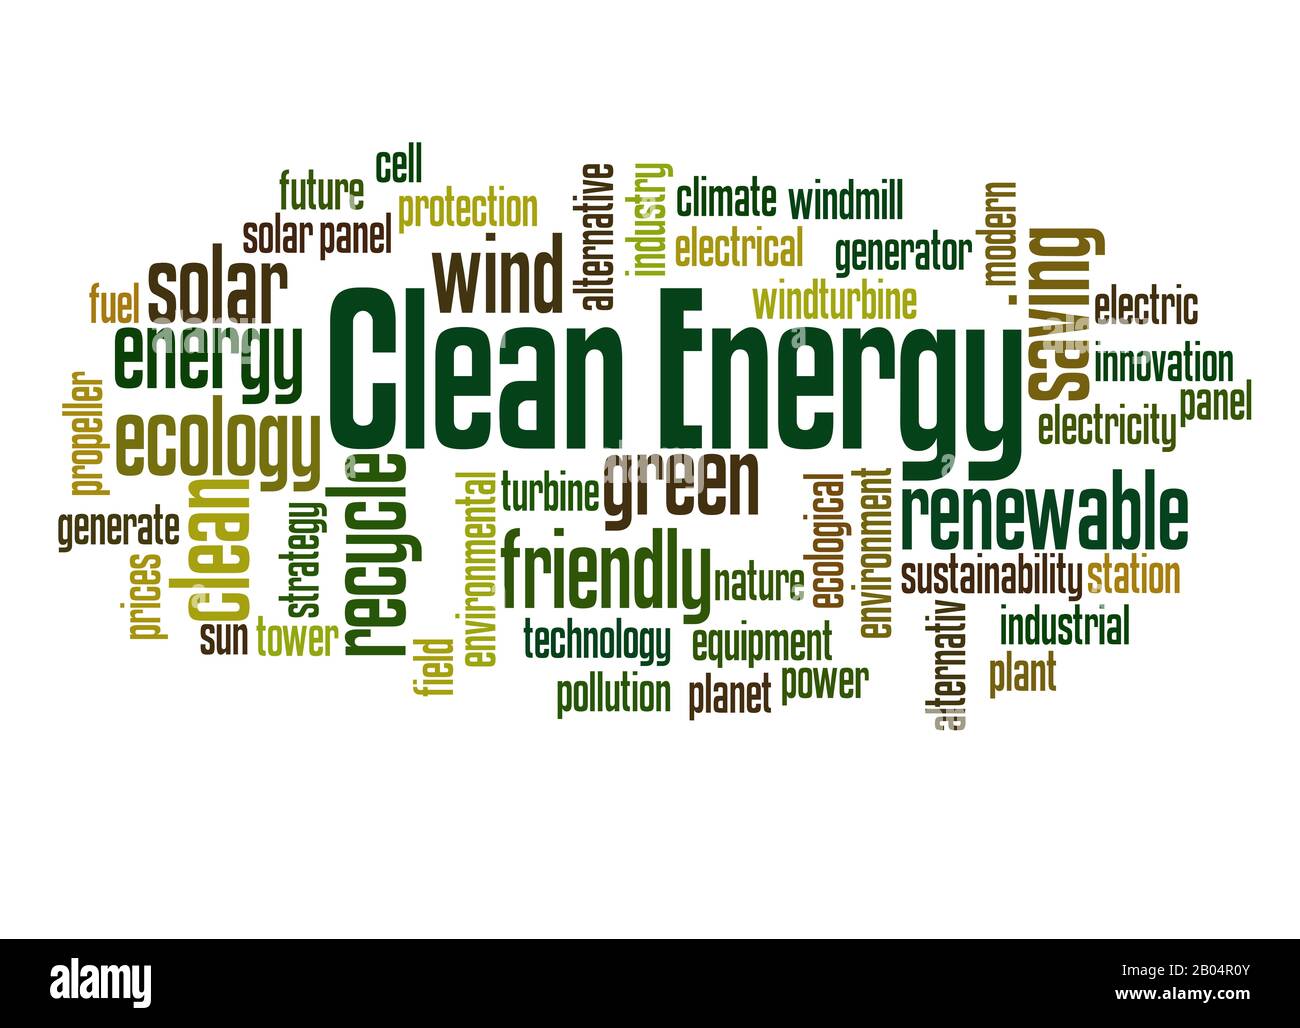 Clean energy word cloud concept on white background. Stock Photo